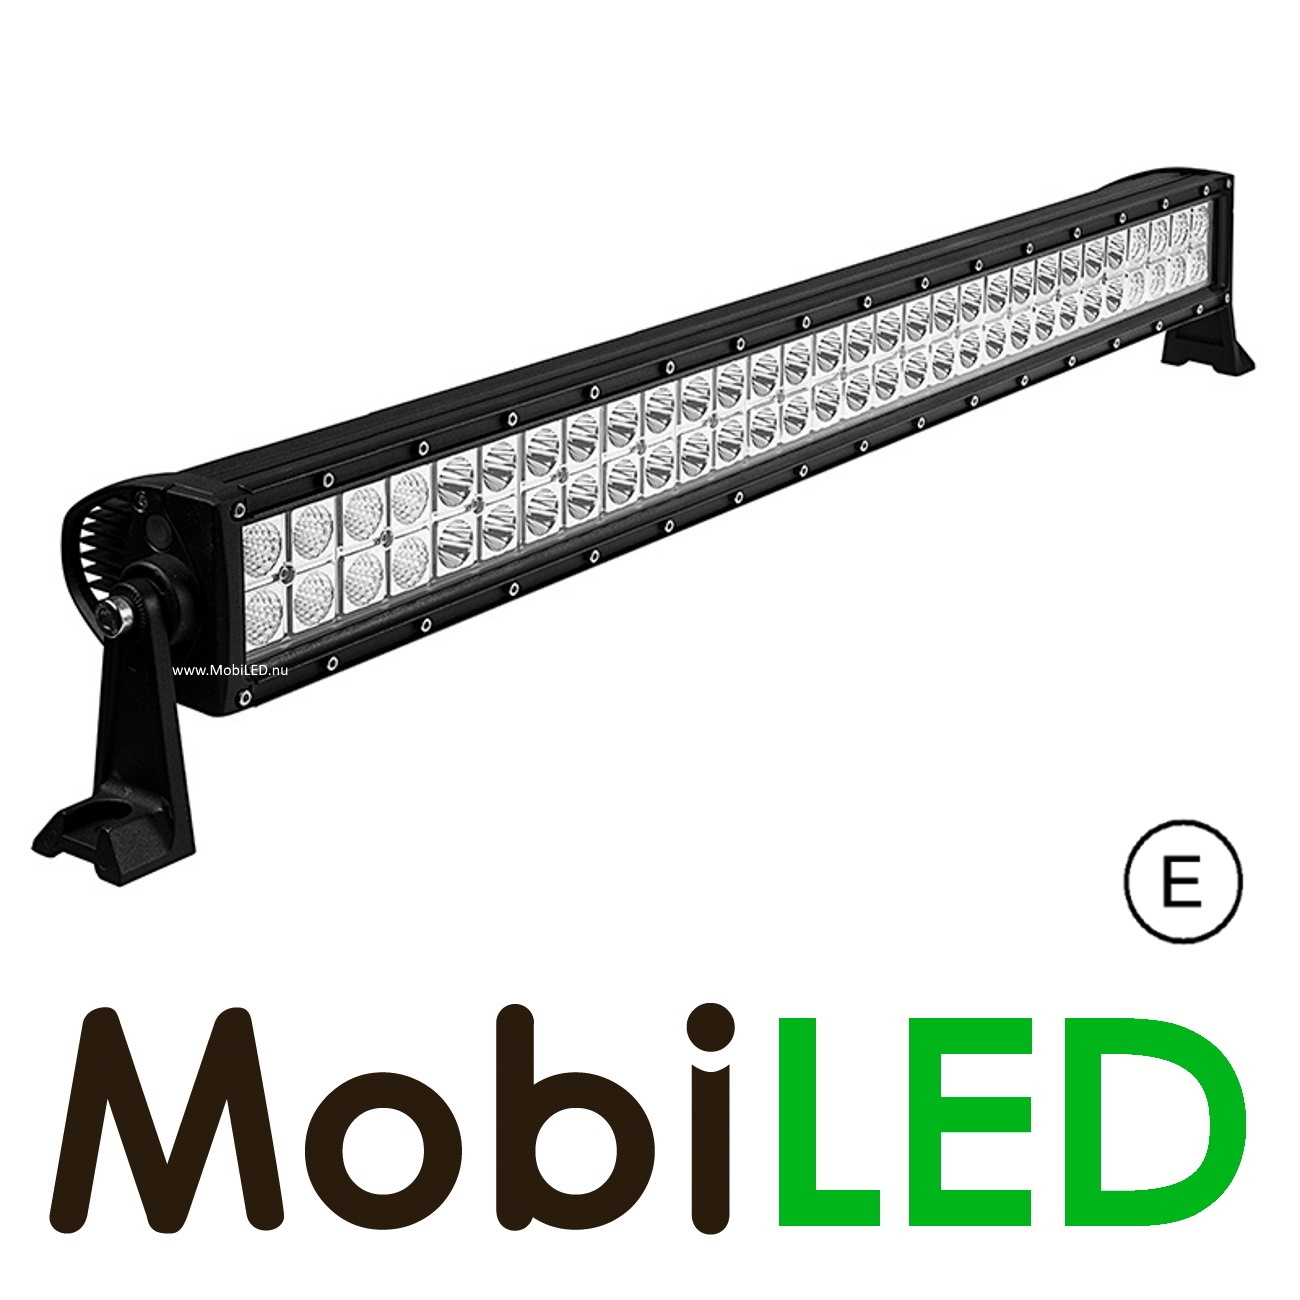 MobiLED  D-type basic barre lumineuse 180 watts combi faisceau - MobiLED